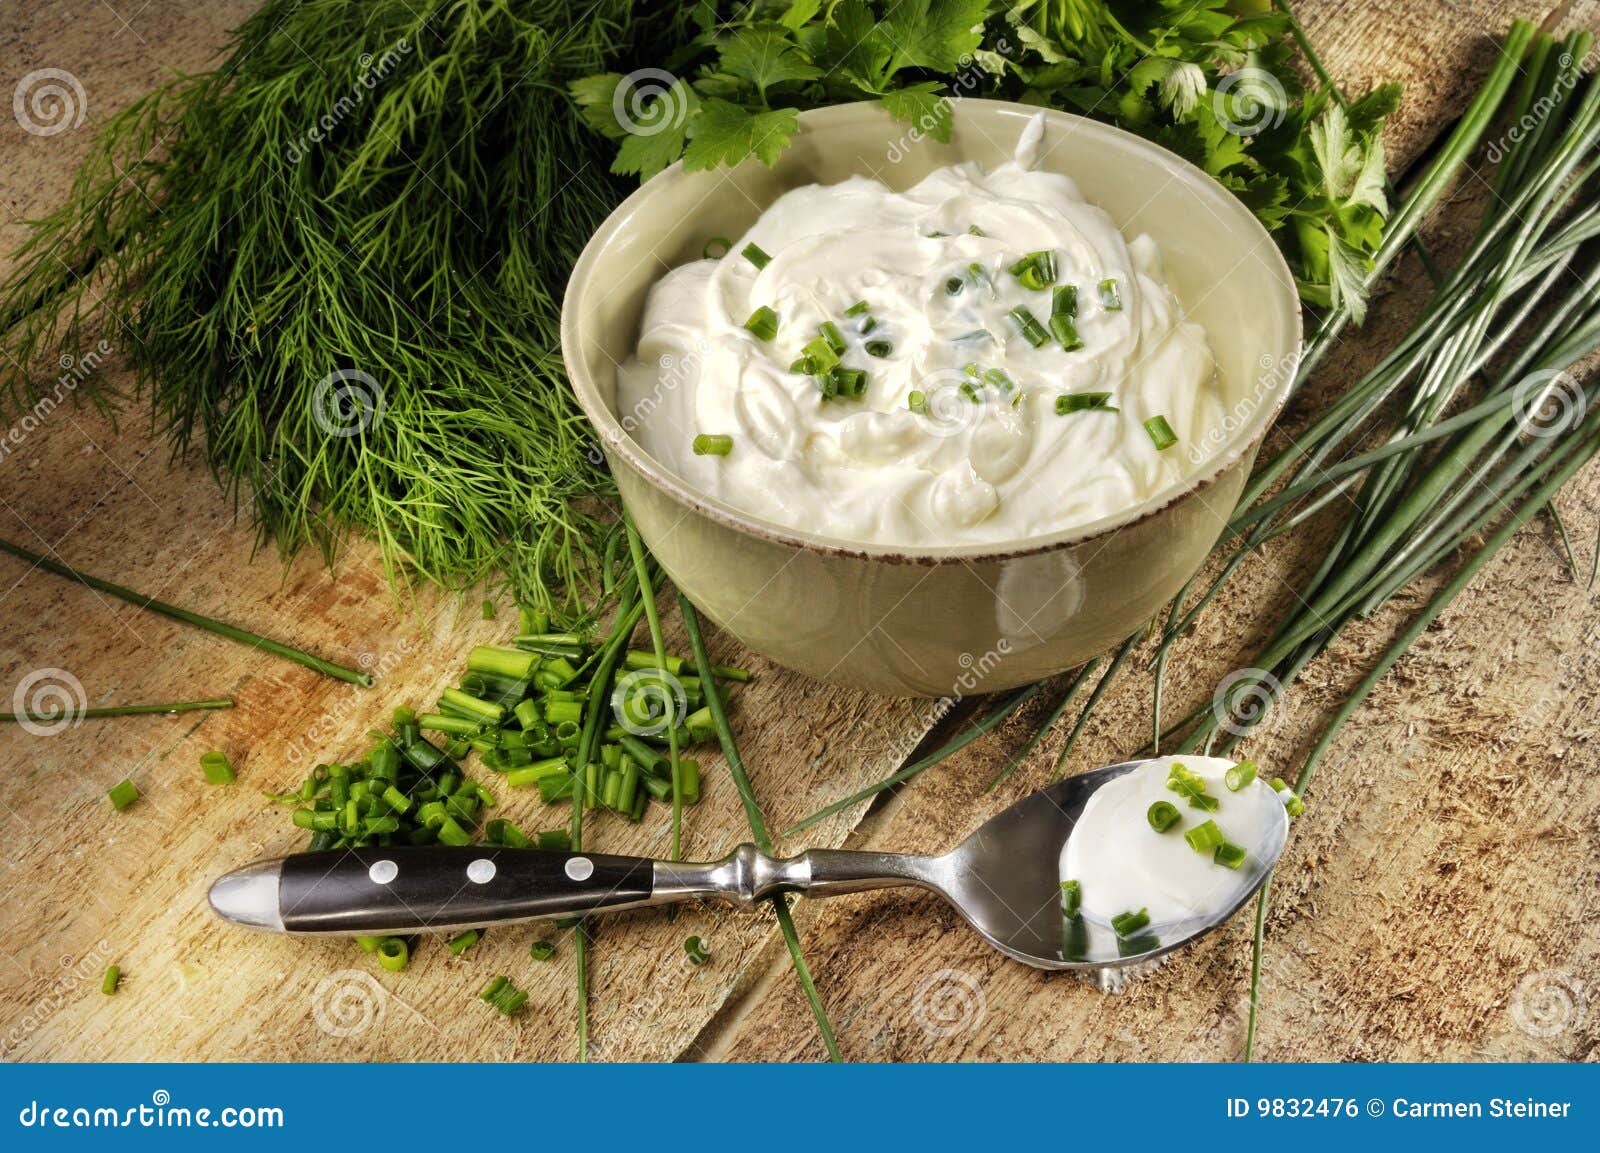 curd with chives